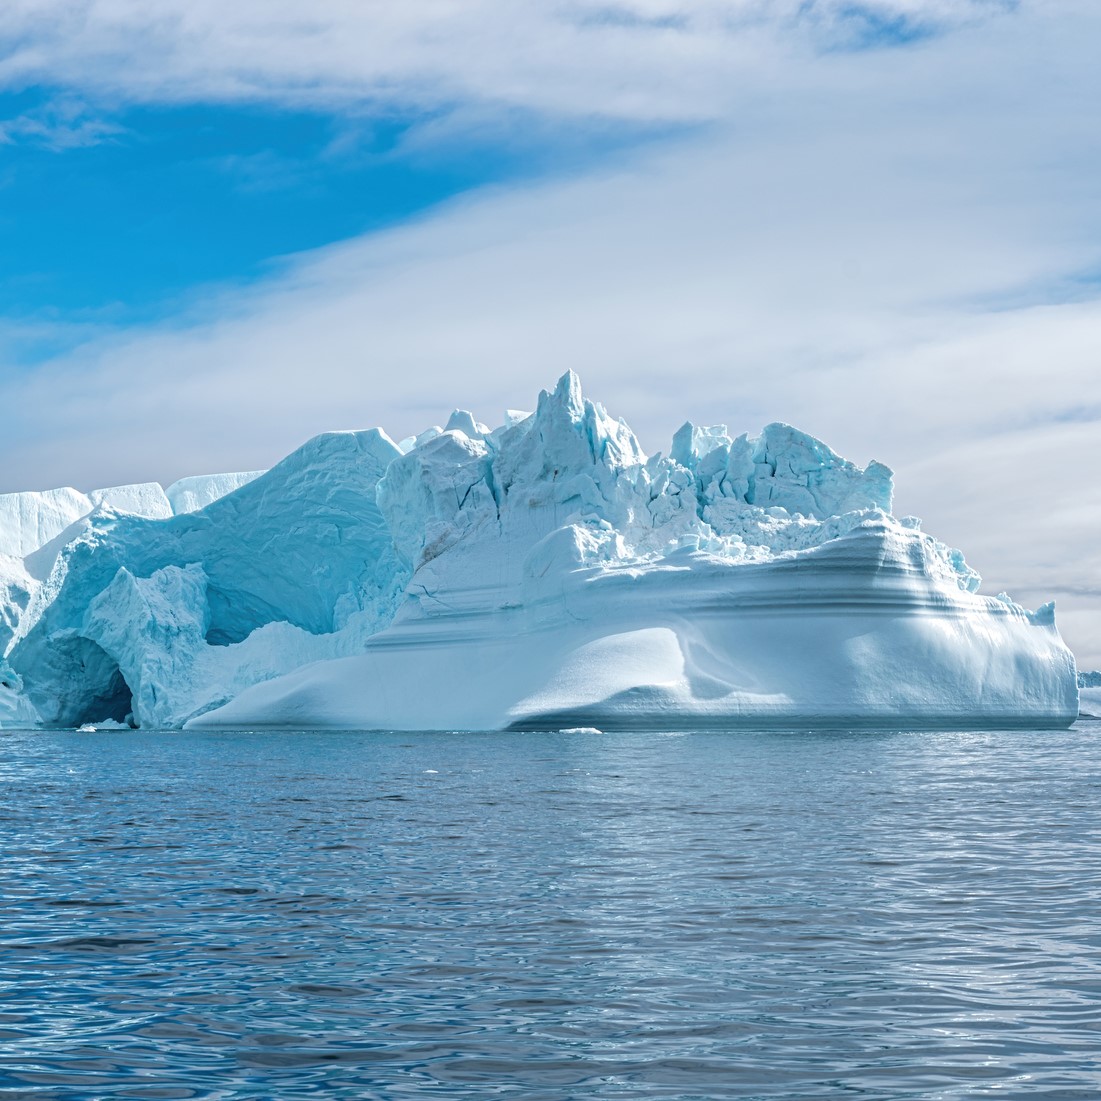 AI can map giant icebergs from satellite images 10,000 times faster than humans 